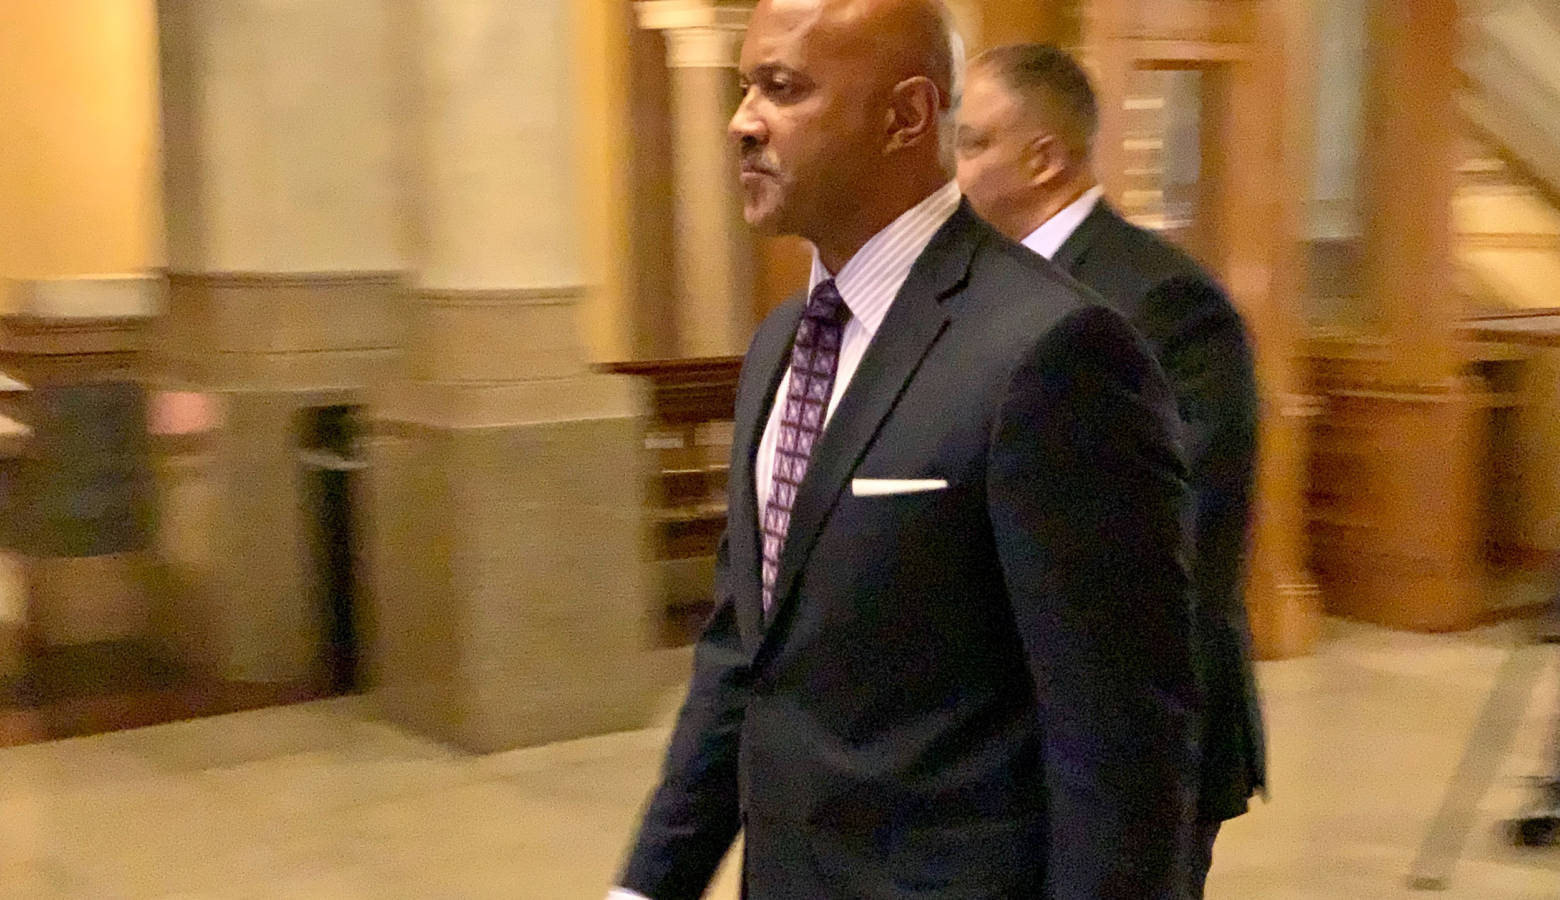 Attorney General Curtis Hill walks into his disciplinary hearing in October 2019. (FILE PHOTO: Brandon Smith/IPB News)